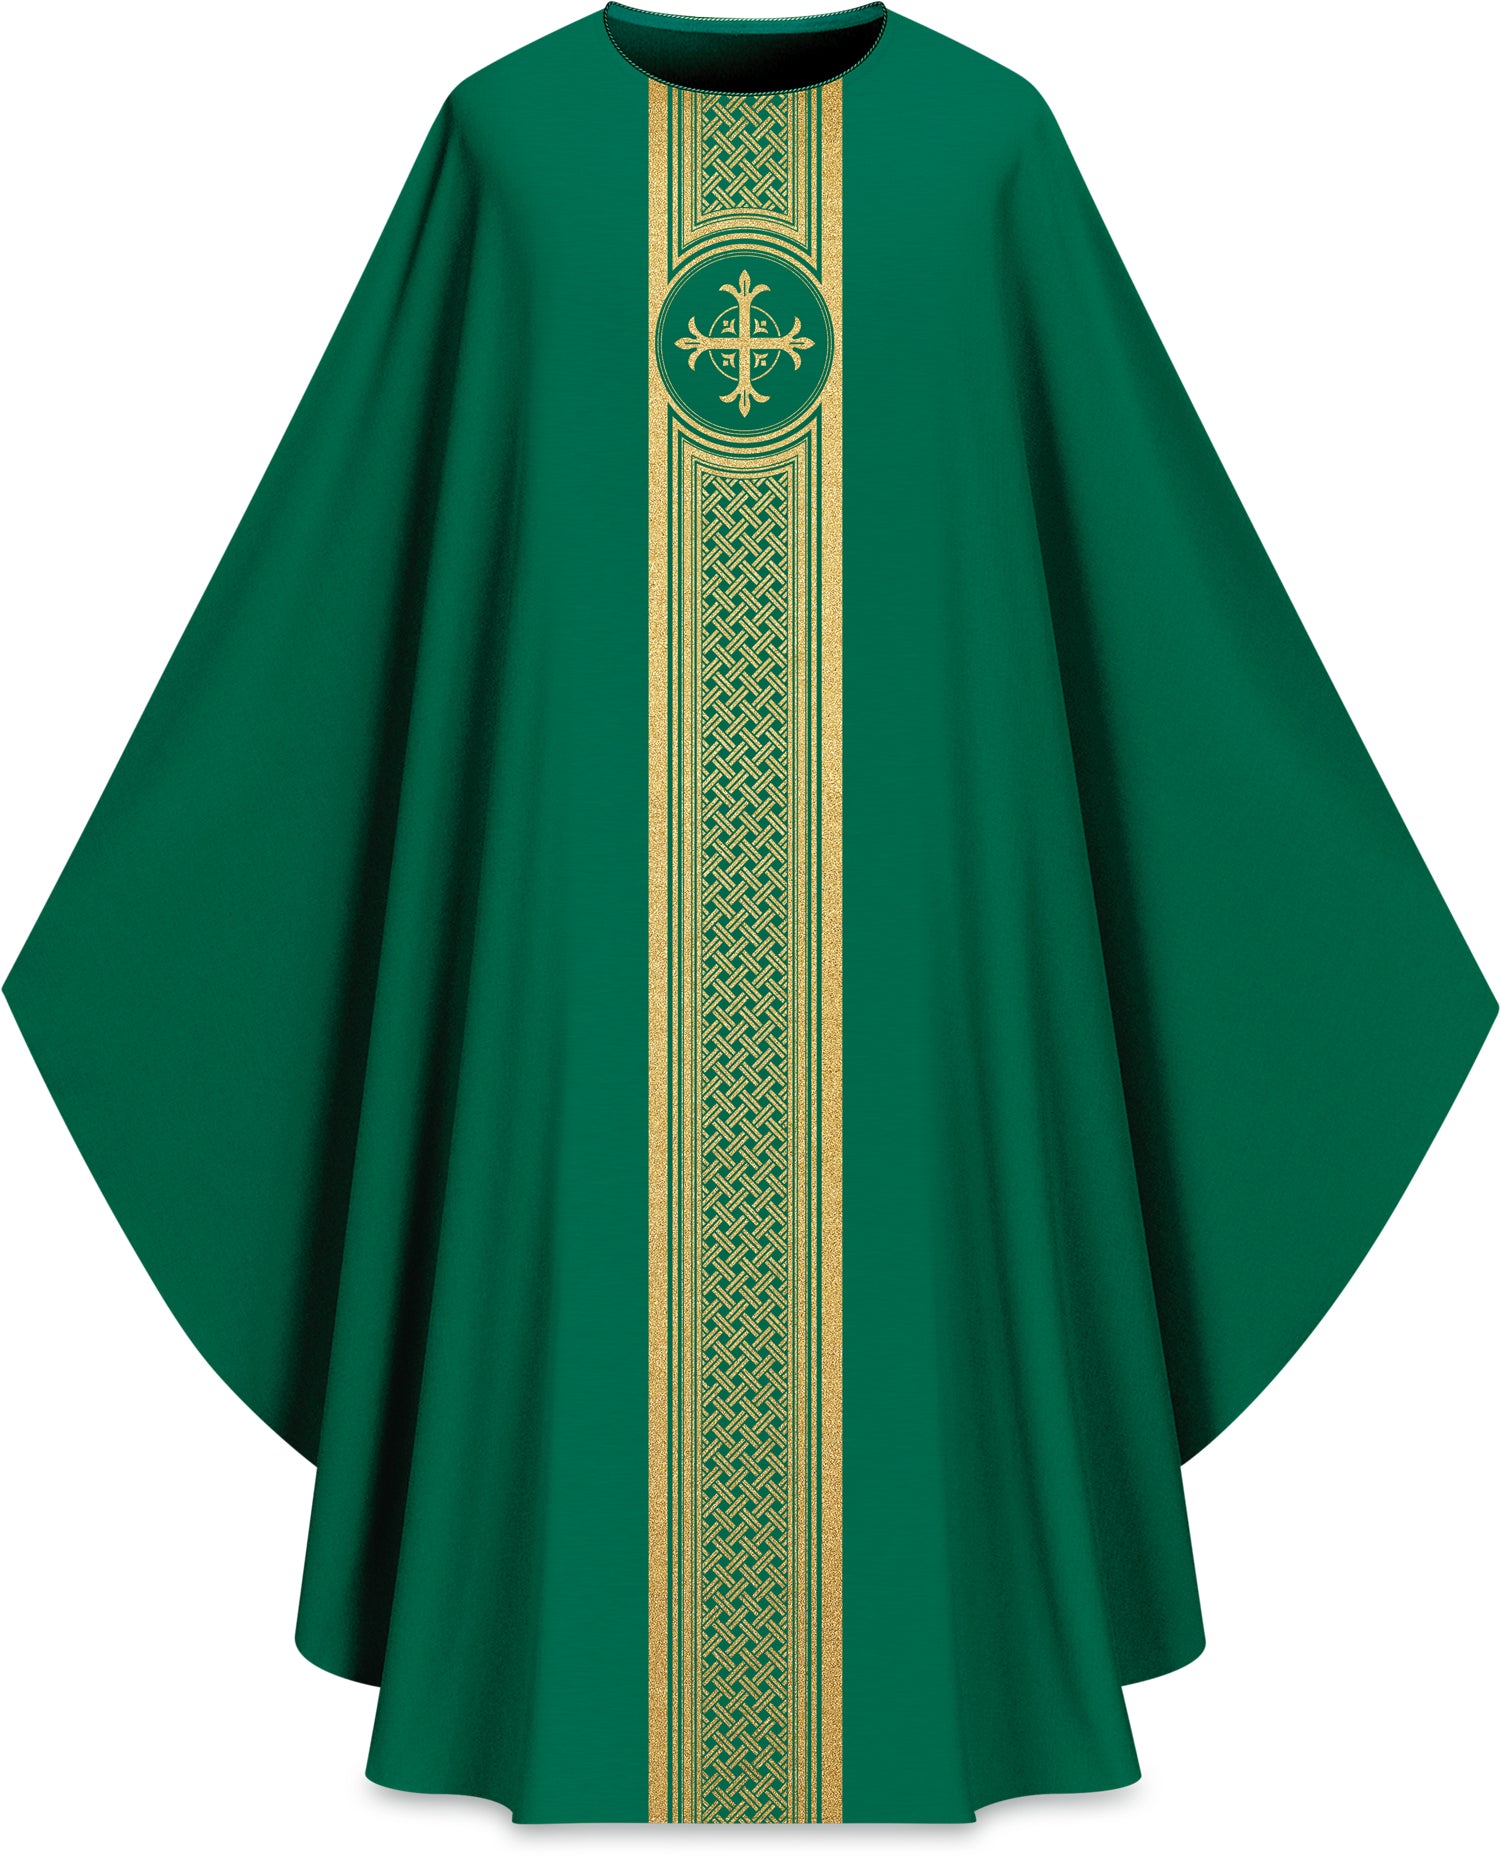 Chasuble with Woven Band | ASSISI by SLABBINCK